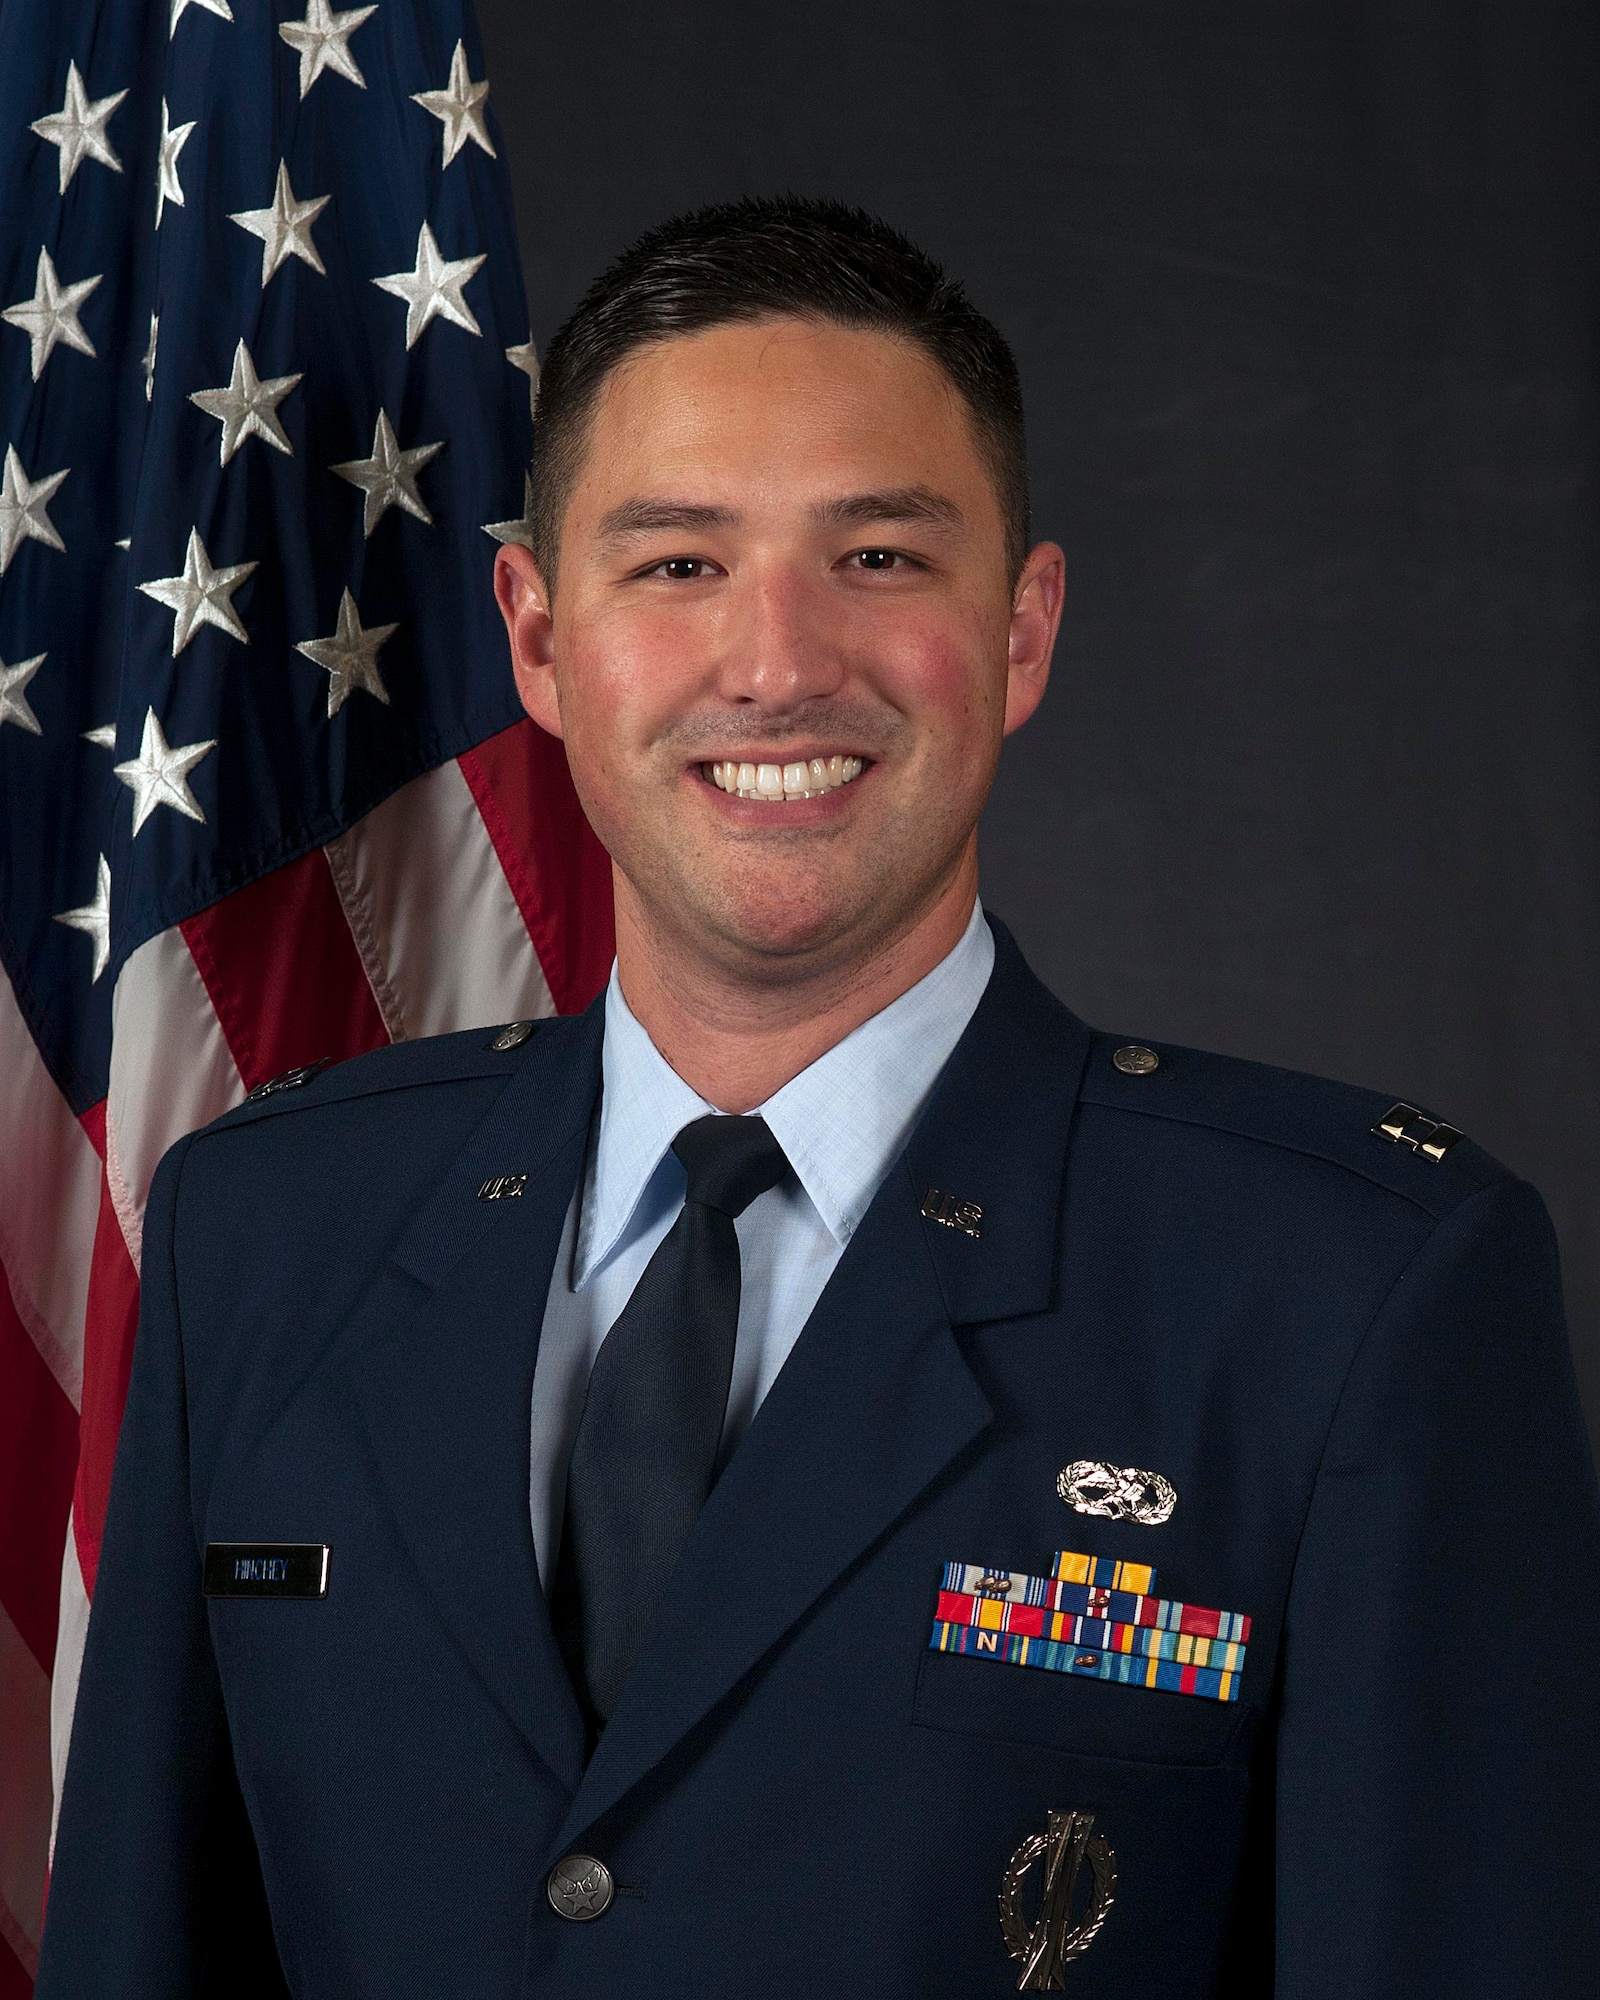 Capt. William Hinchey, 18th Munitions Squadron, has been named 5th Air Force's 2016 Company Grade Officer of the Year.